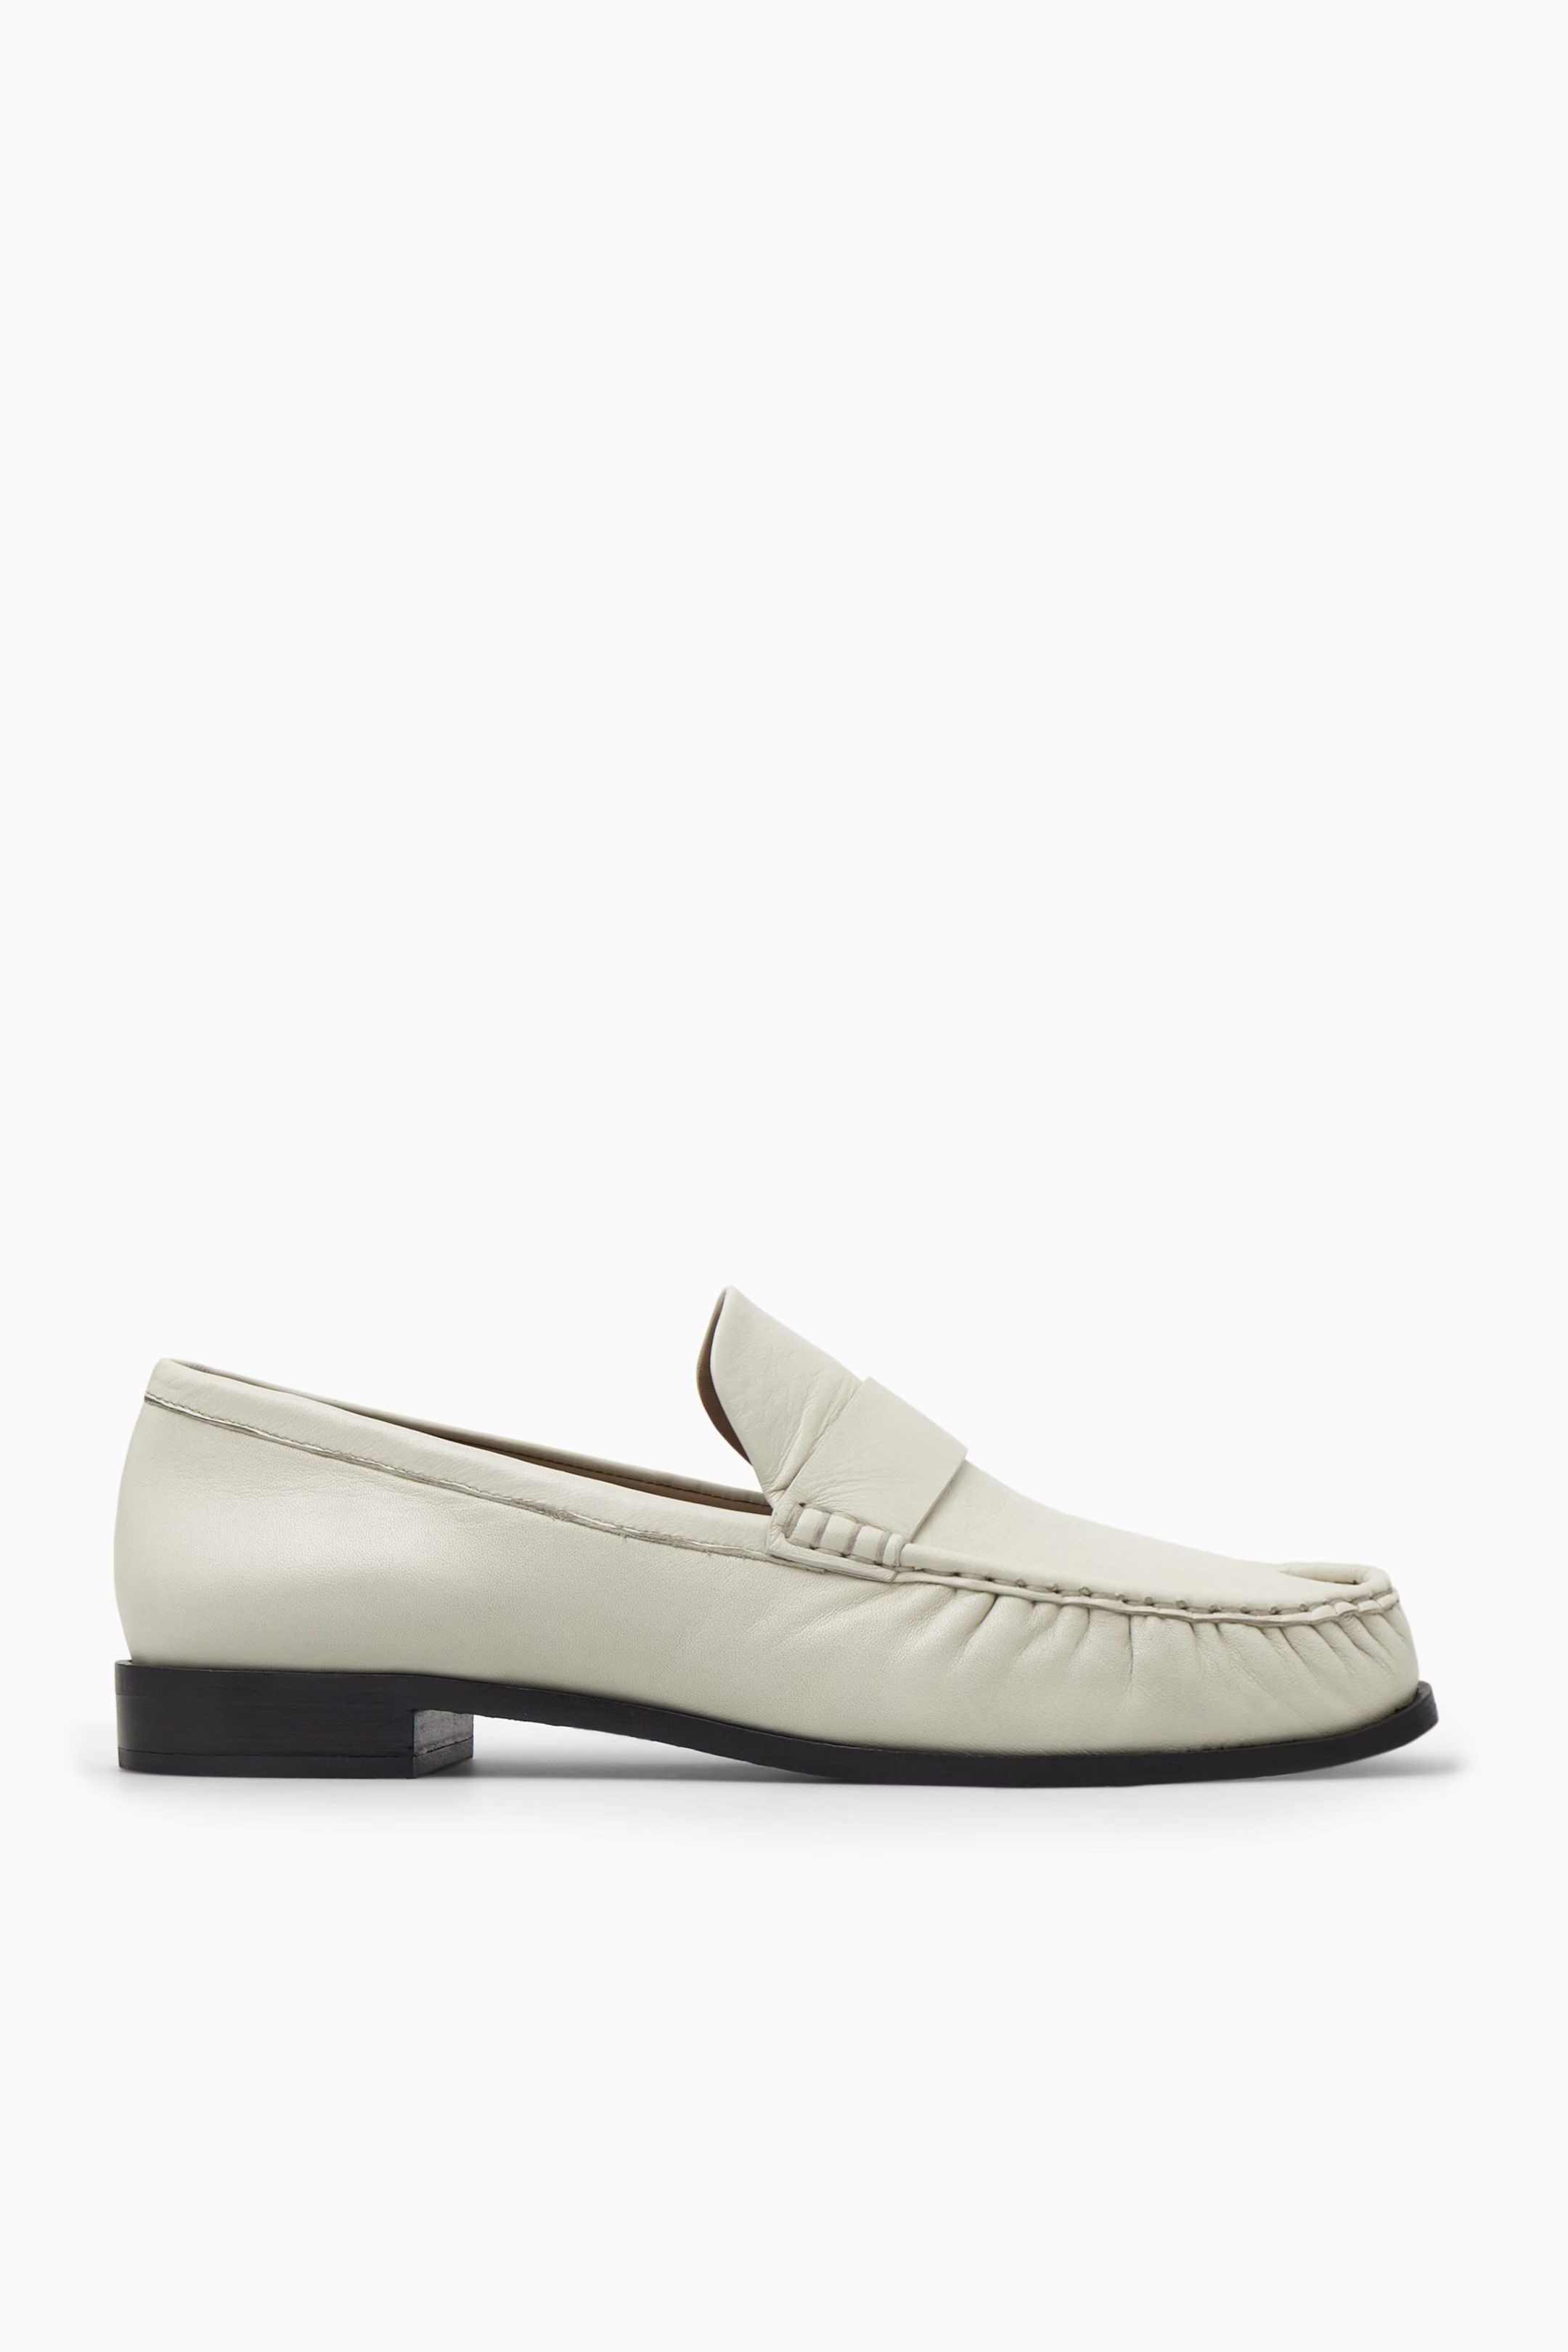 LEATHER LOAFERS | COS (ANZ)